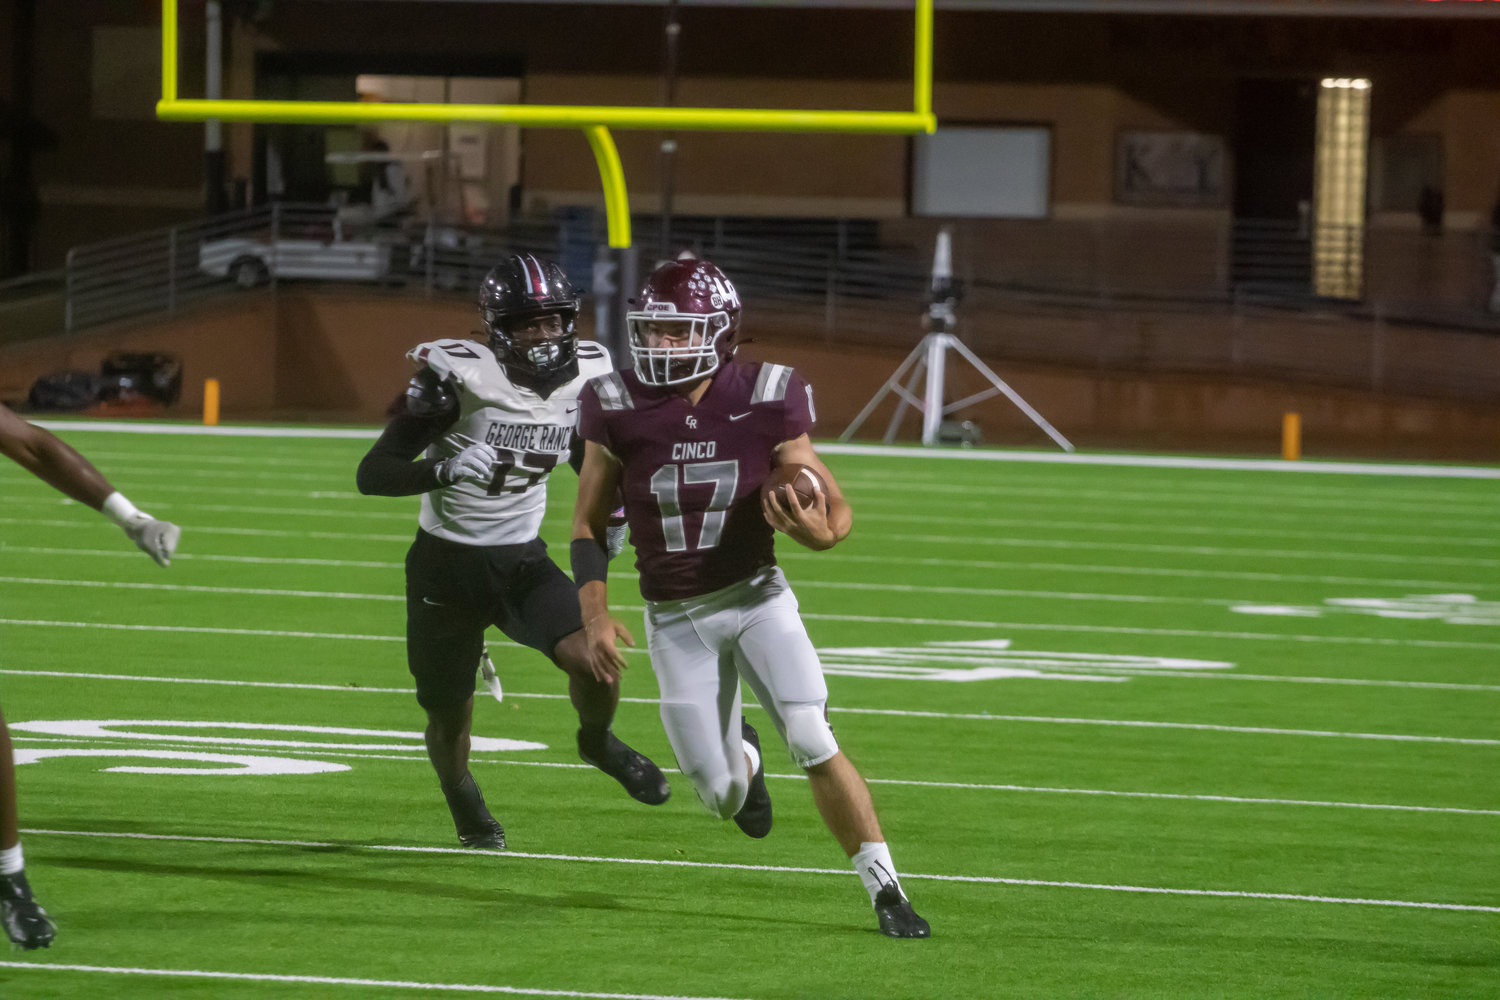 Eric Eckstrom runs toward the open field during Friday's game between Cinco Ranch and George Ranch at Rhodes Stadium.